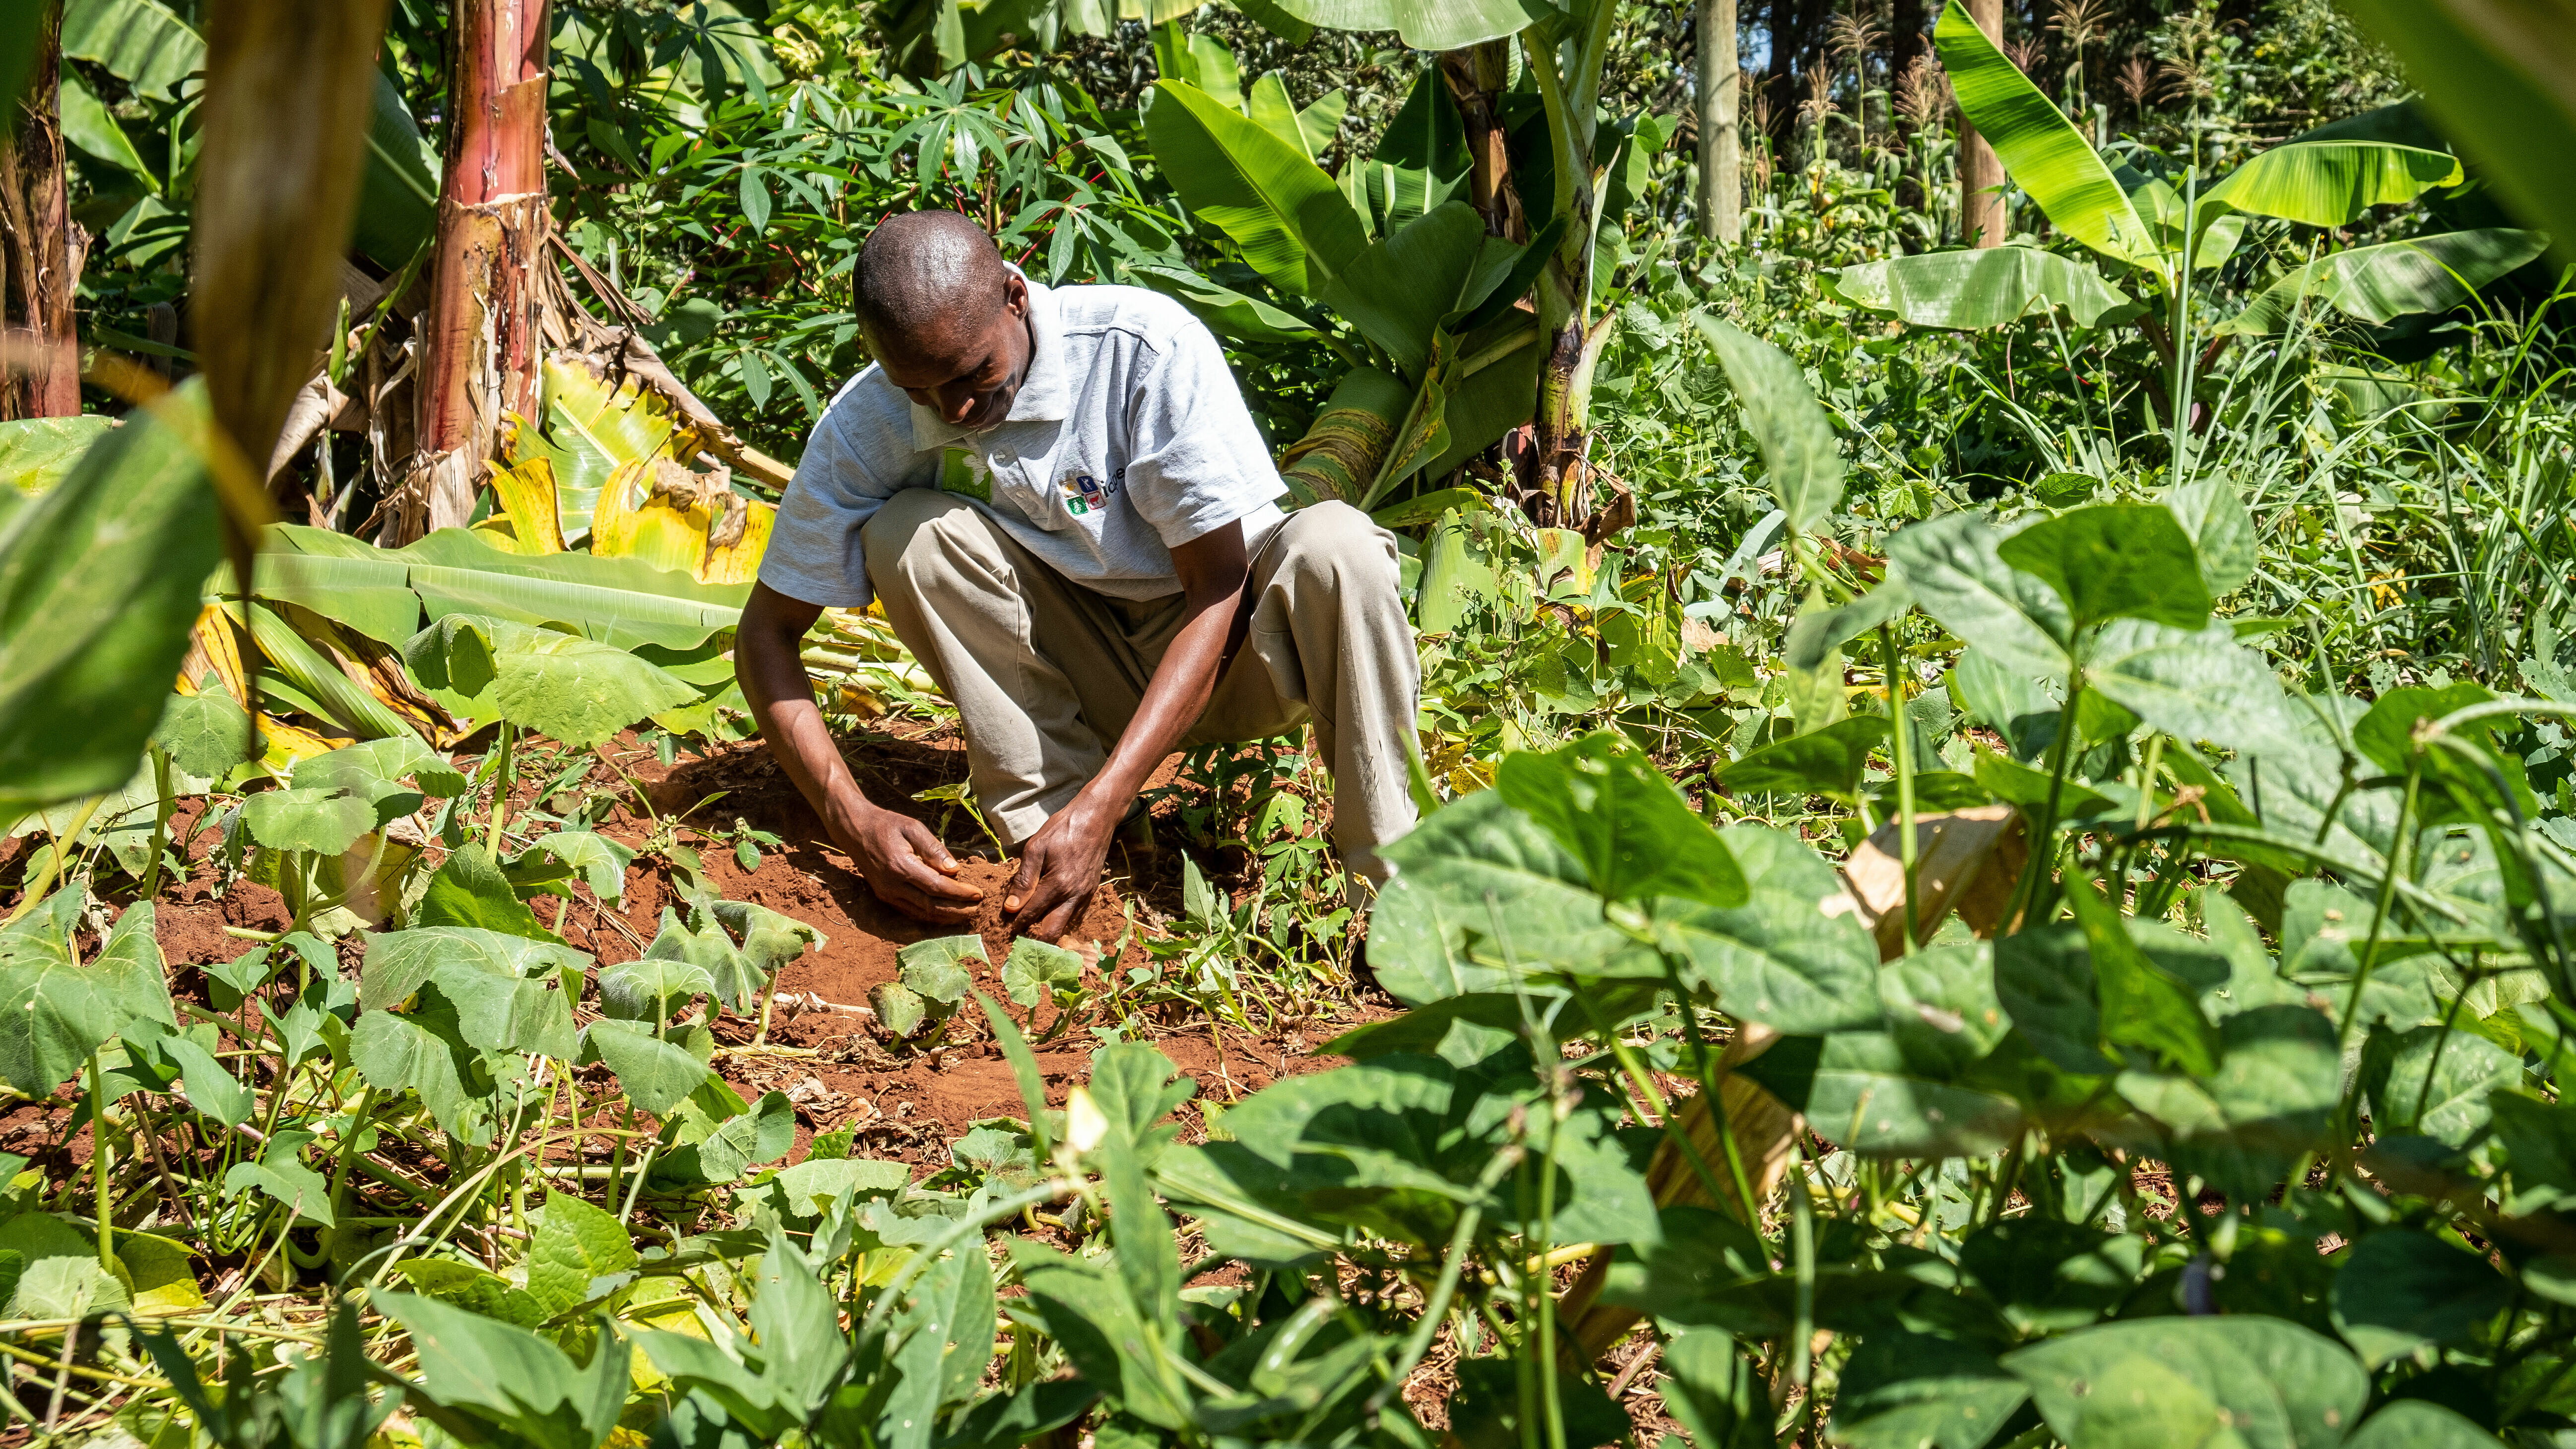 A dark-skinned man is kneeling on the floor and working on the soil. He is surrounded by the vibrant green of a rainforest.